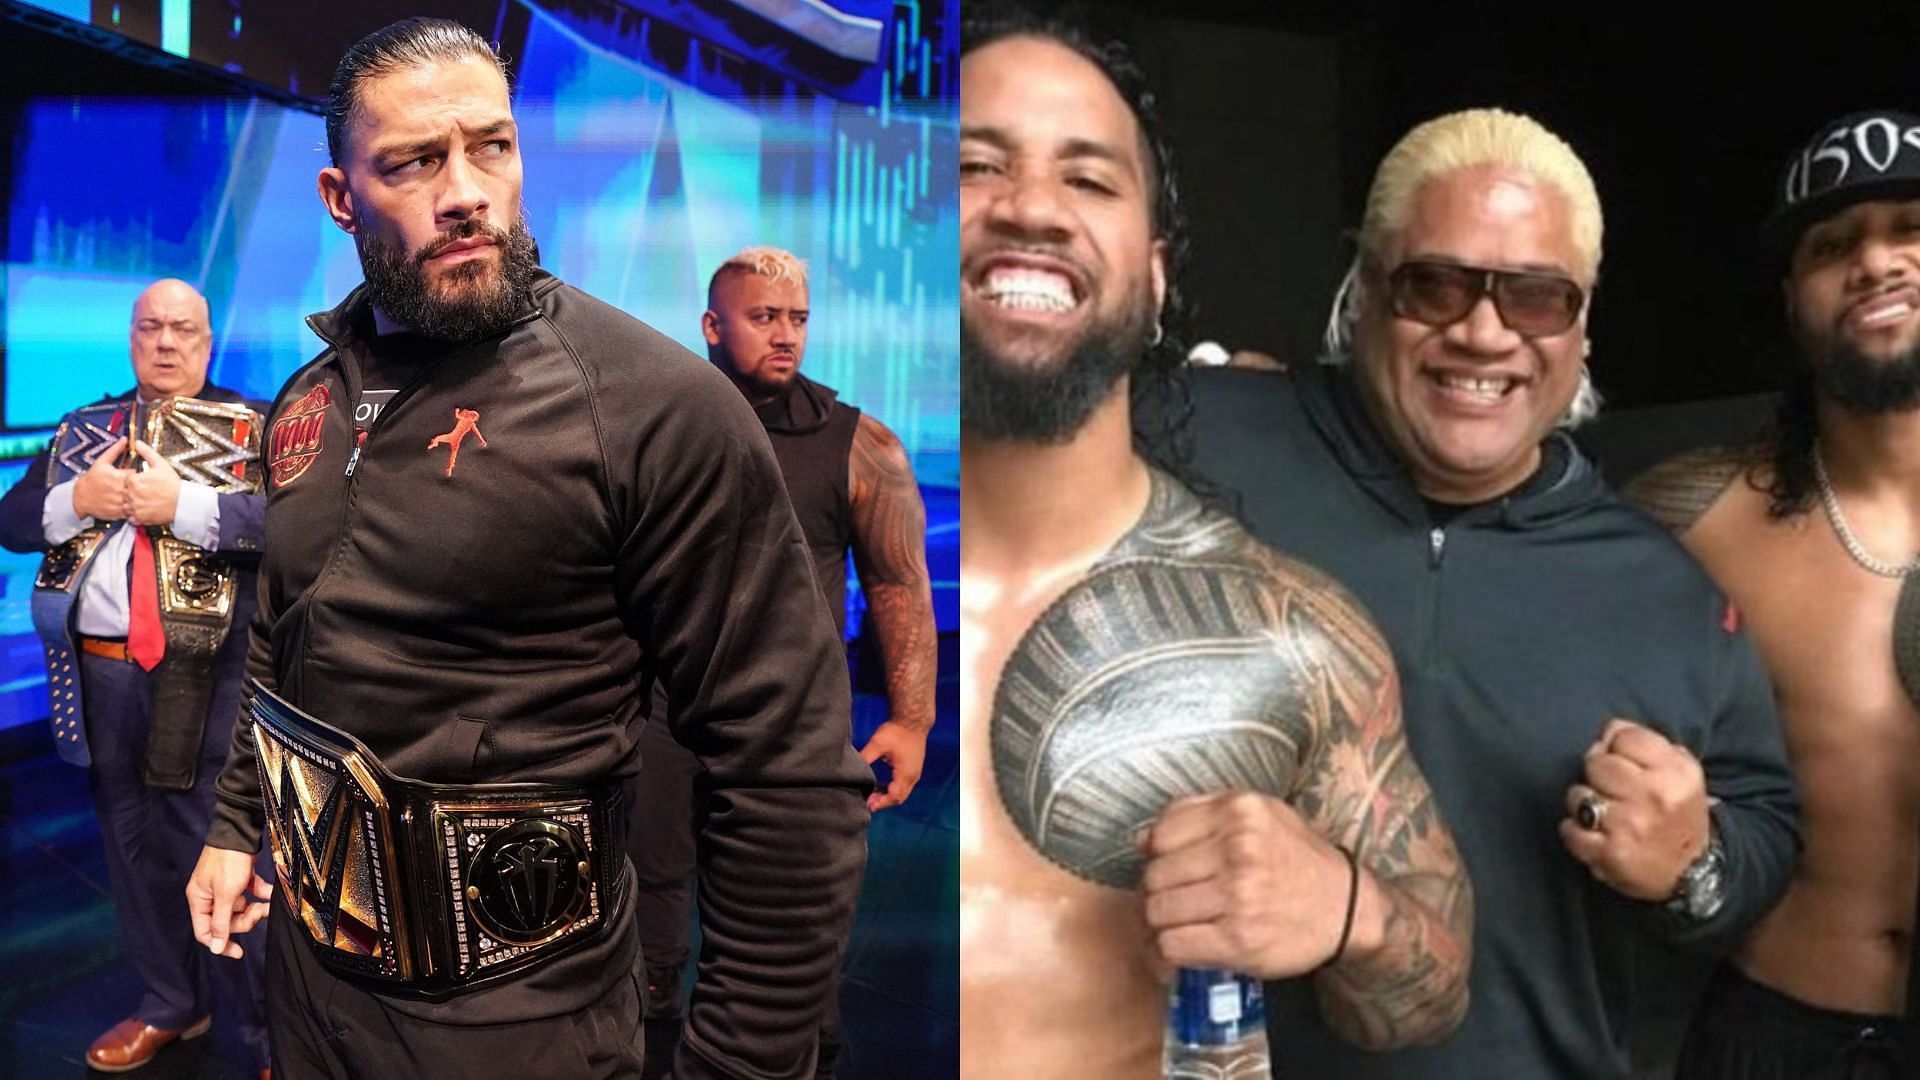 Rikishi reacted to The Bloodline pulling big numbers for WWE